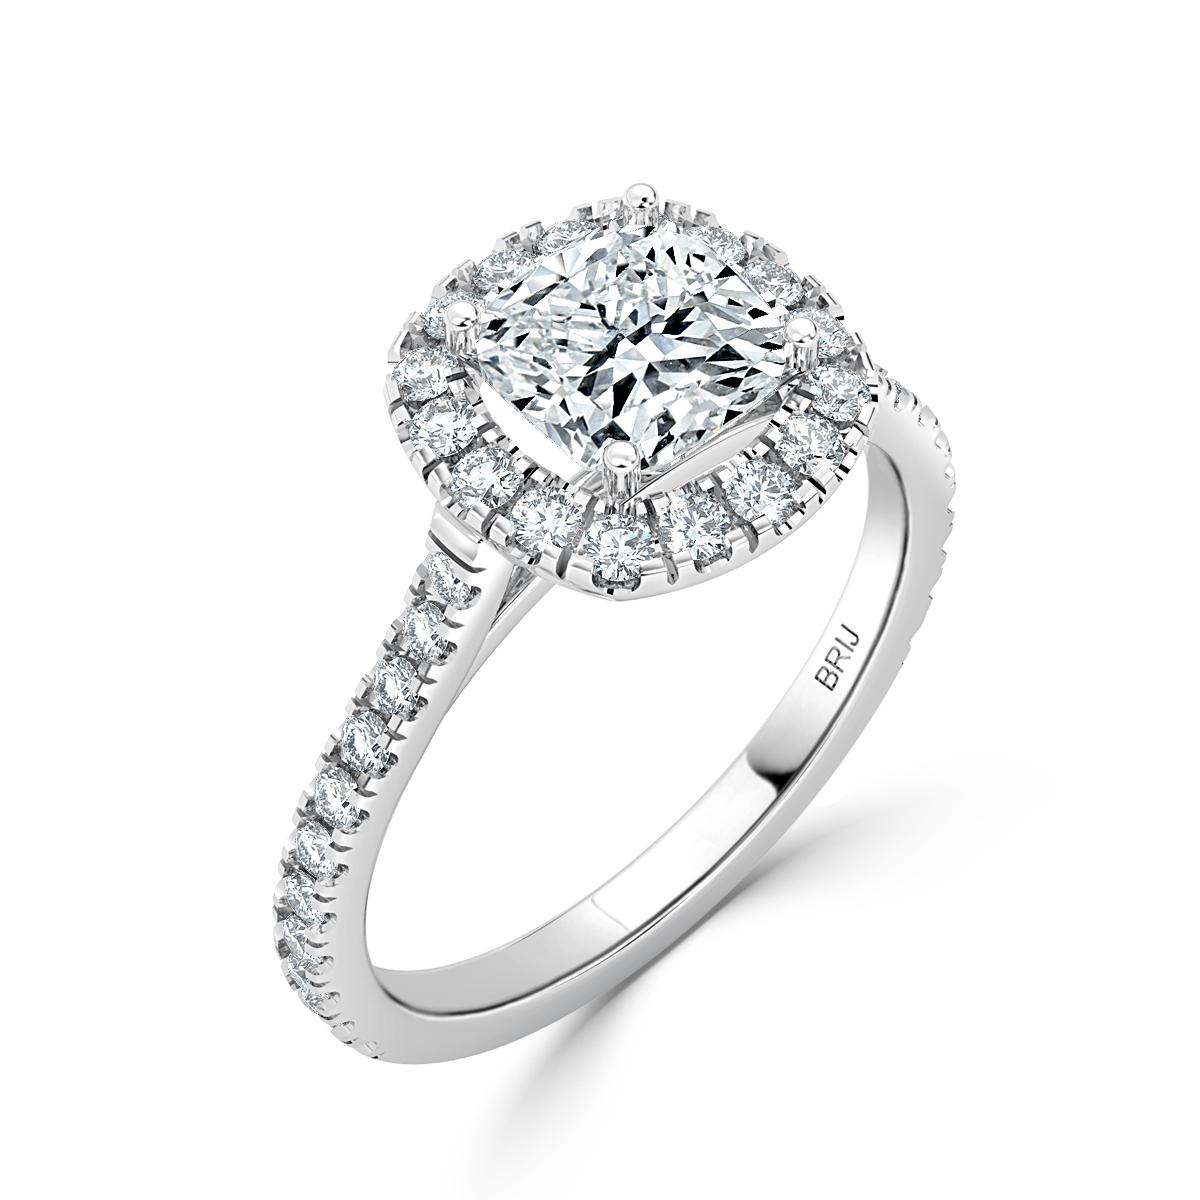 Simple, classic Diamond Halo engagement ring. Accented with 32 full cut diamonds along the shank  and Halo in a 18k White Gold setting. 
GIA certified round center stone 1.02 CT
Total Carat weight above 1.40 CT

GIA Certified Diamond Details
Weight: